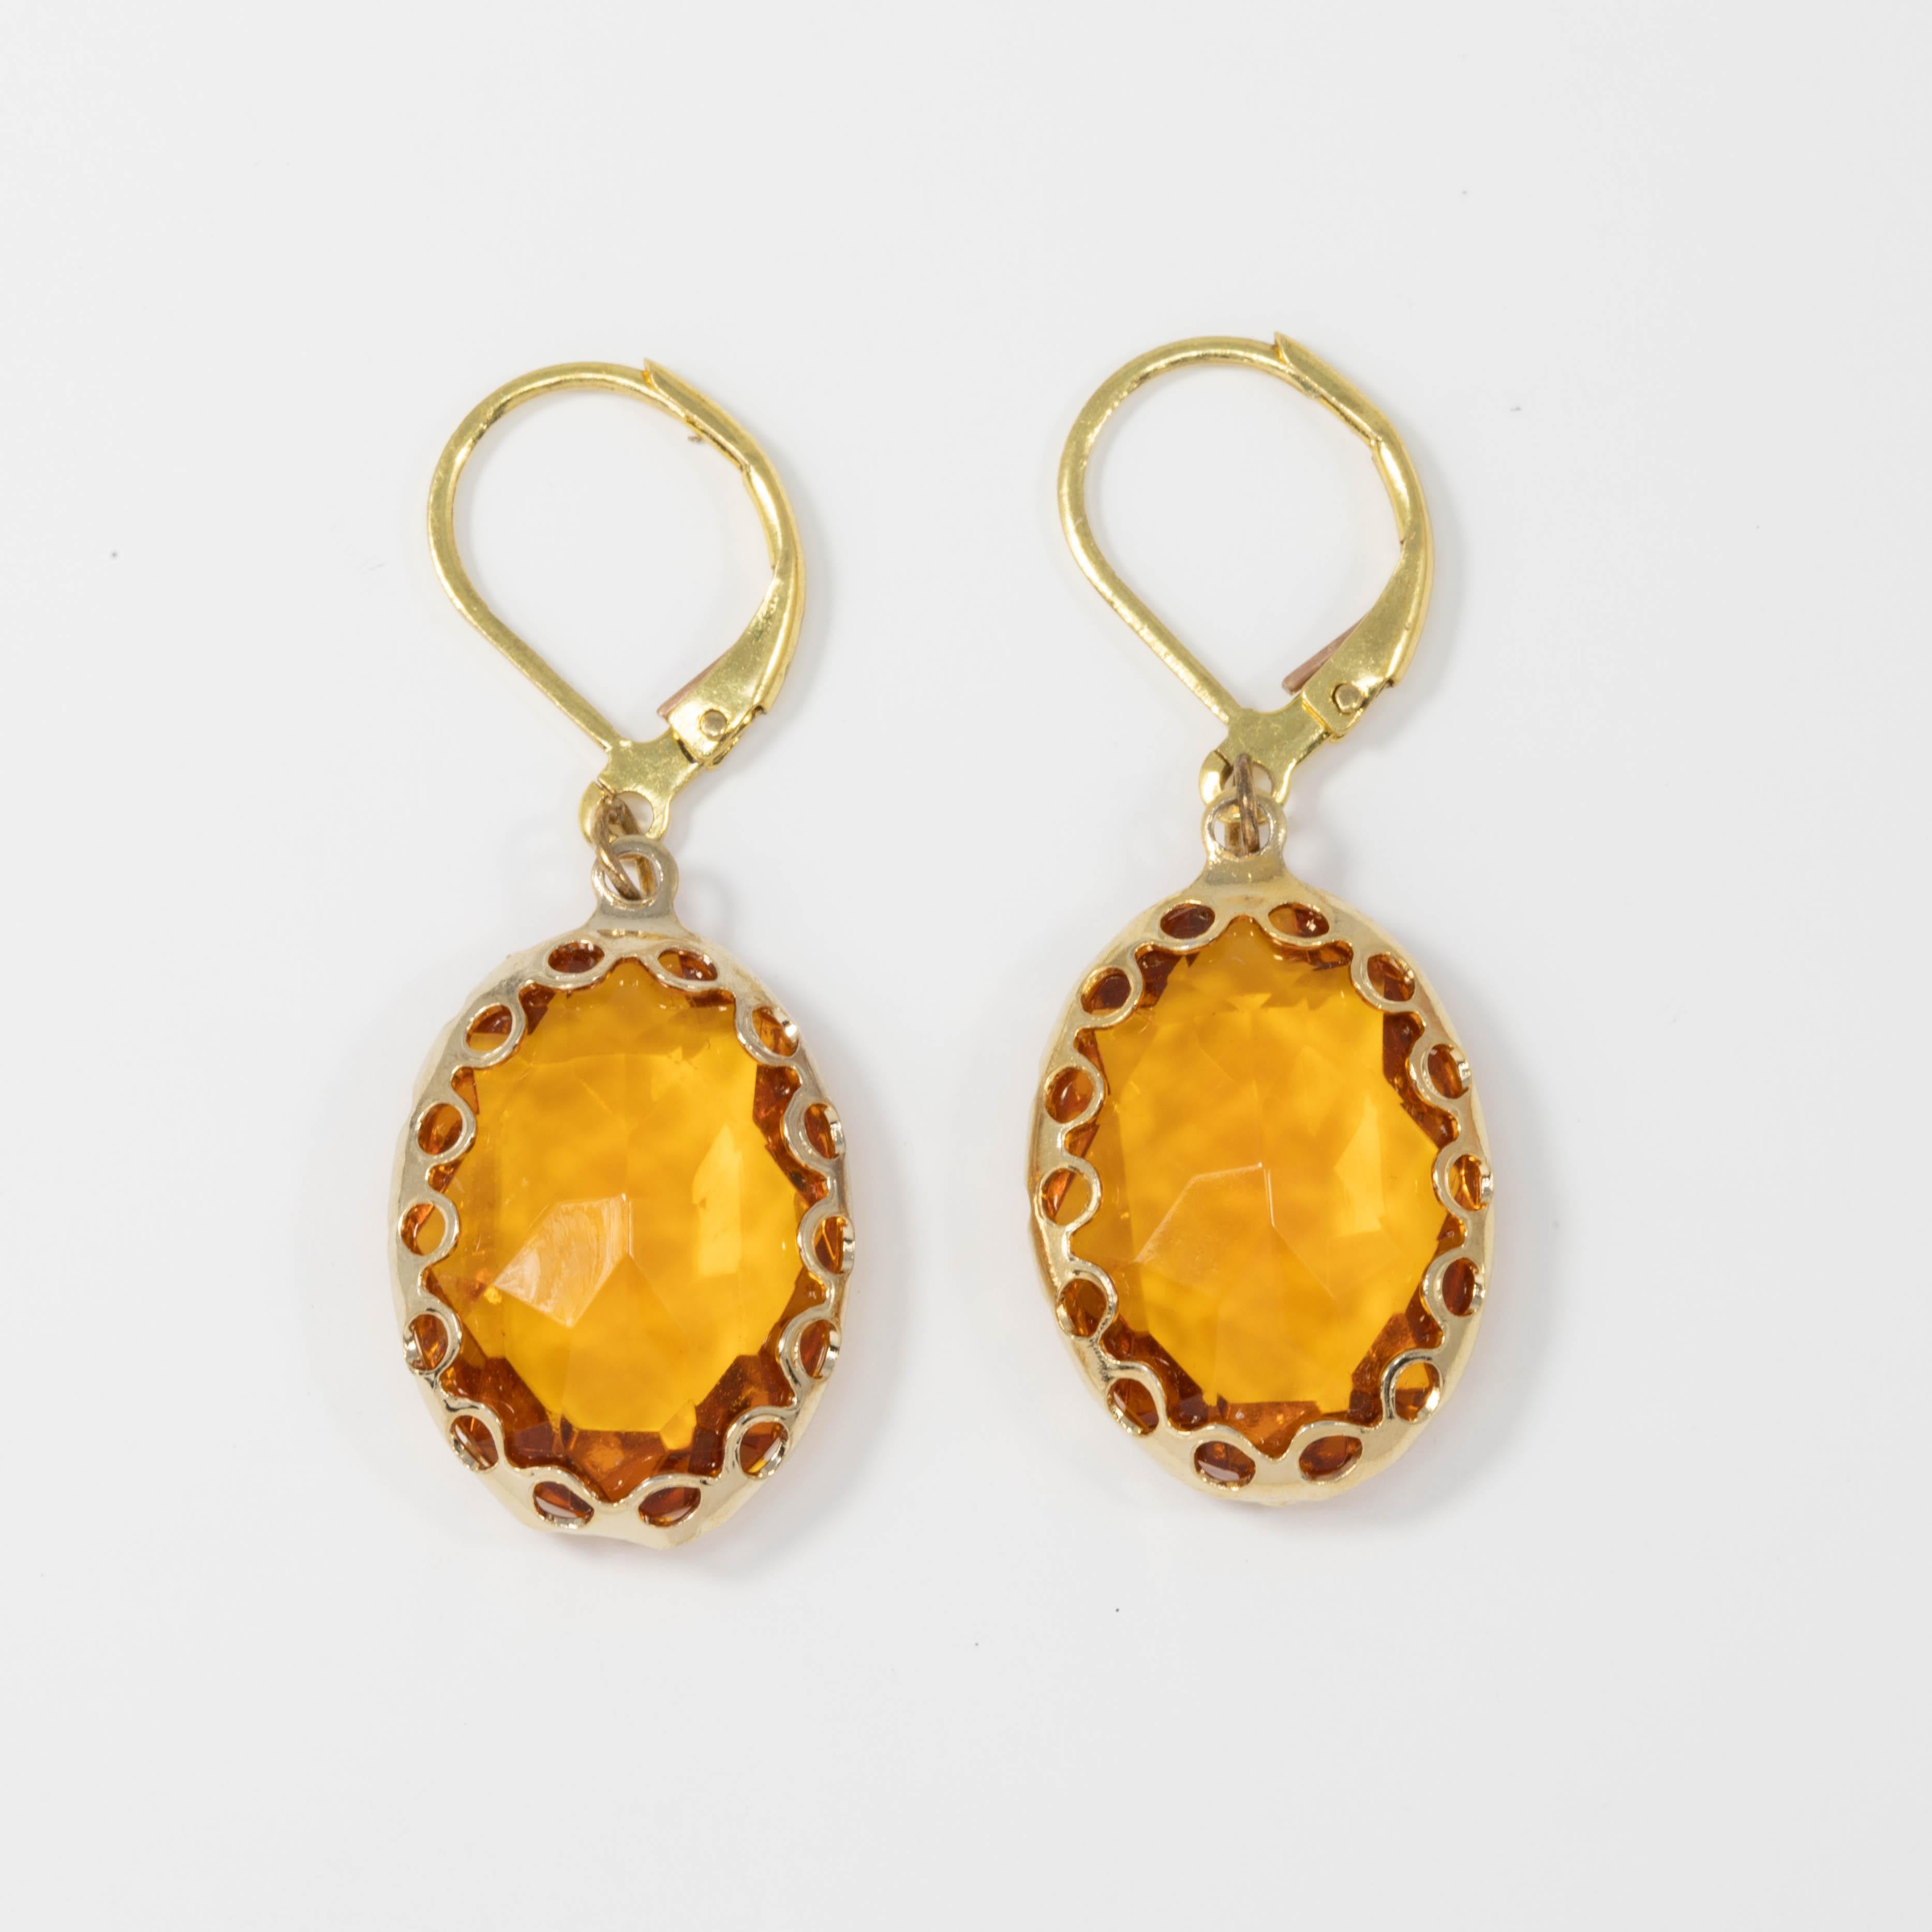 A pair of bright amber-yellow crystal dangling earrings. Each crystal is set in a decorative gold tone bezel. Lever back hook finding.

Circa mid 1900s